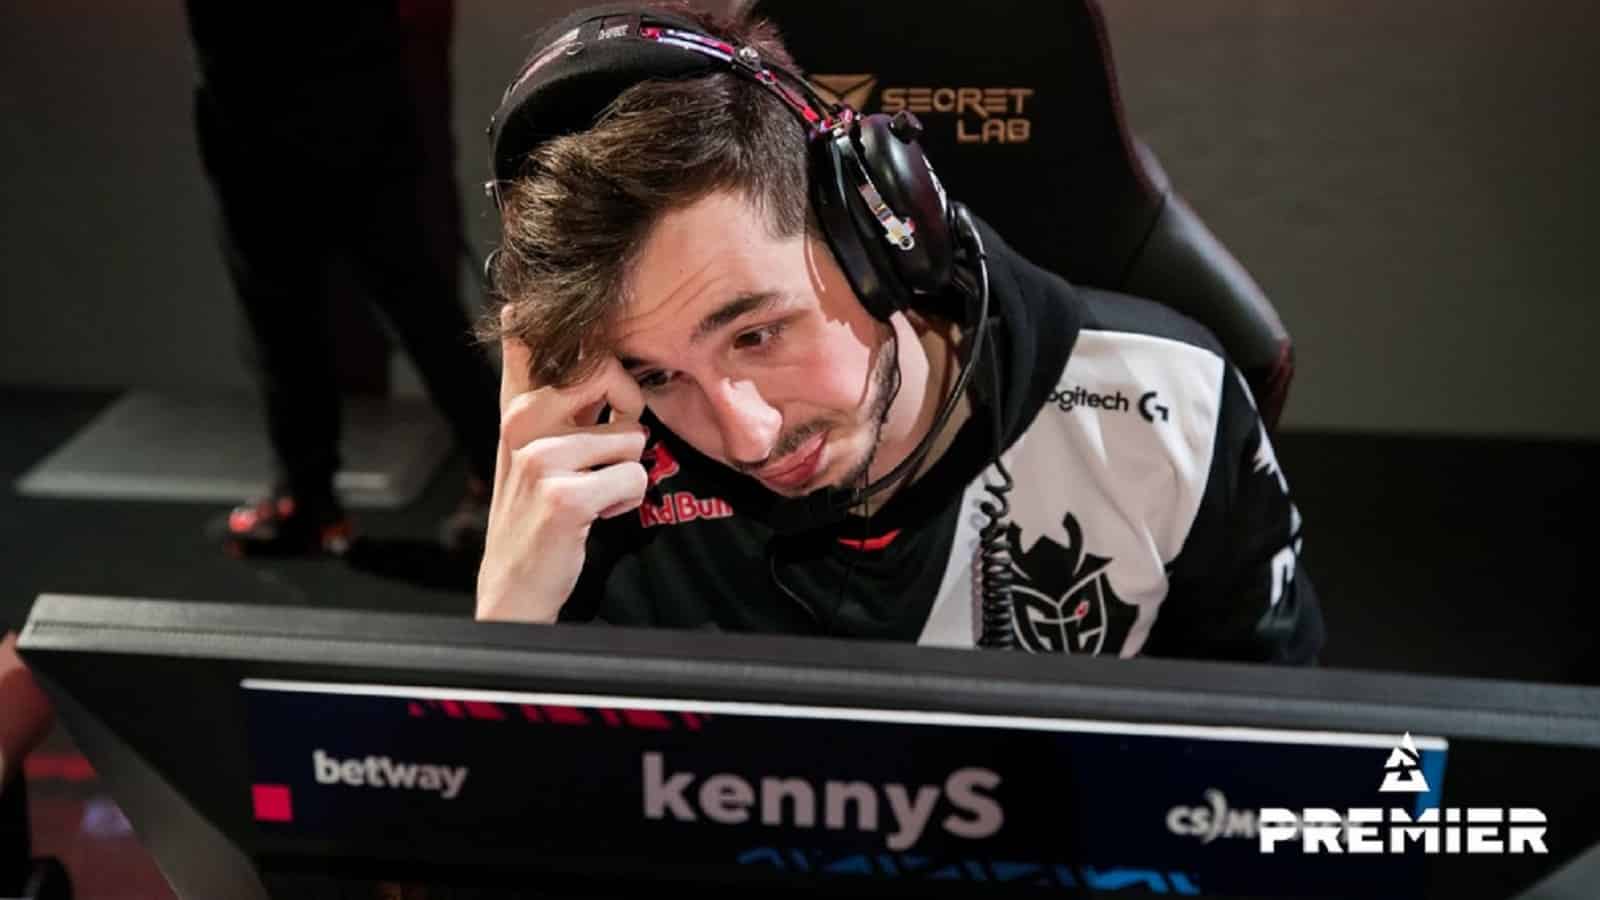 kennys with G2 at BLAST Premier